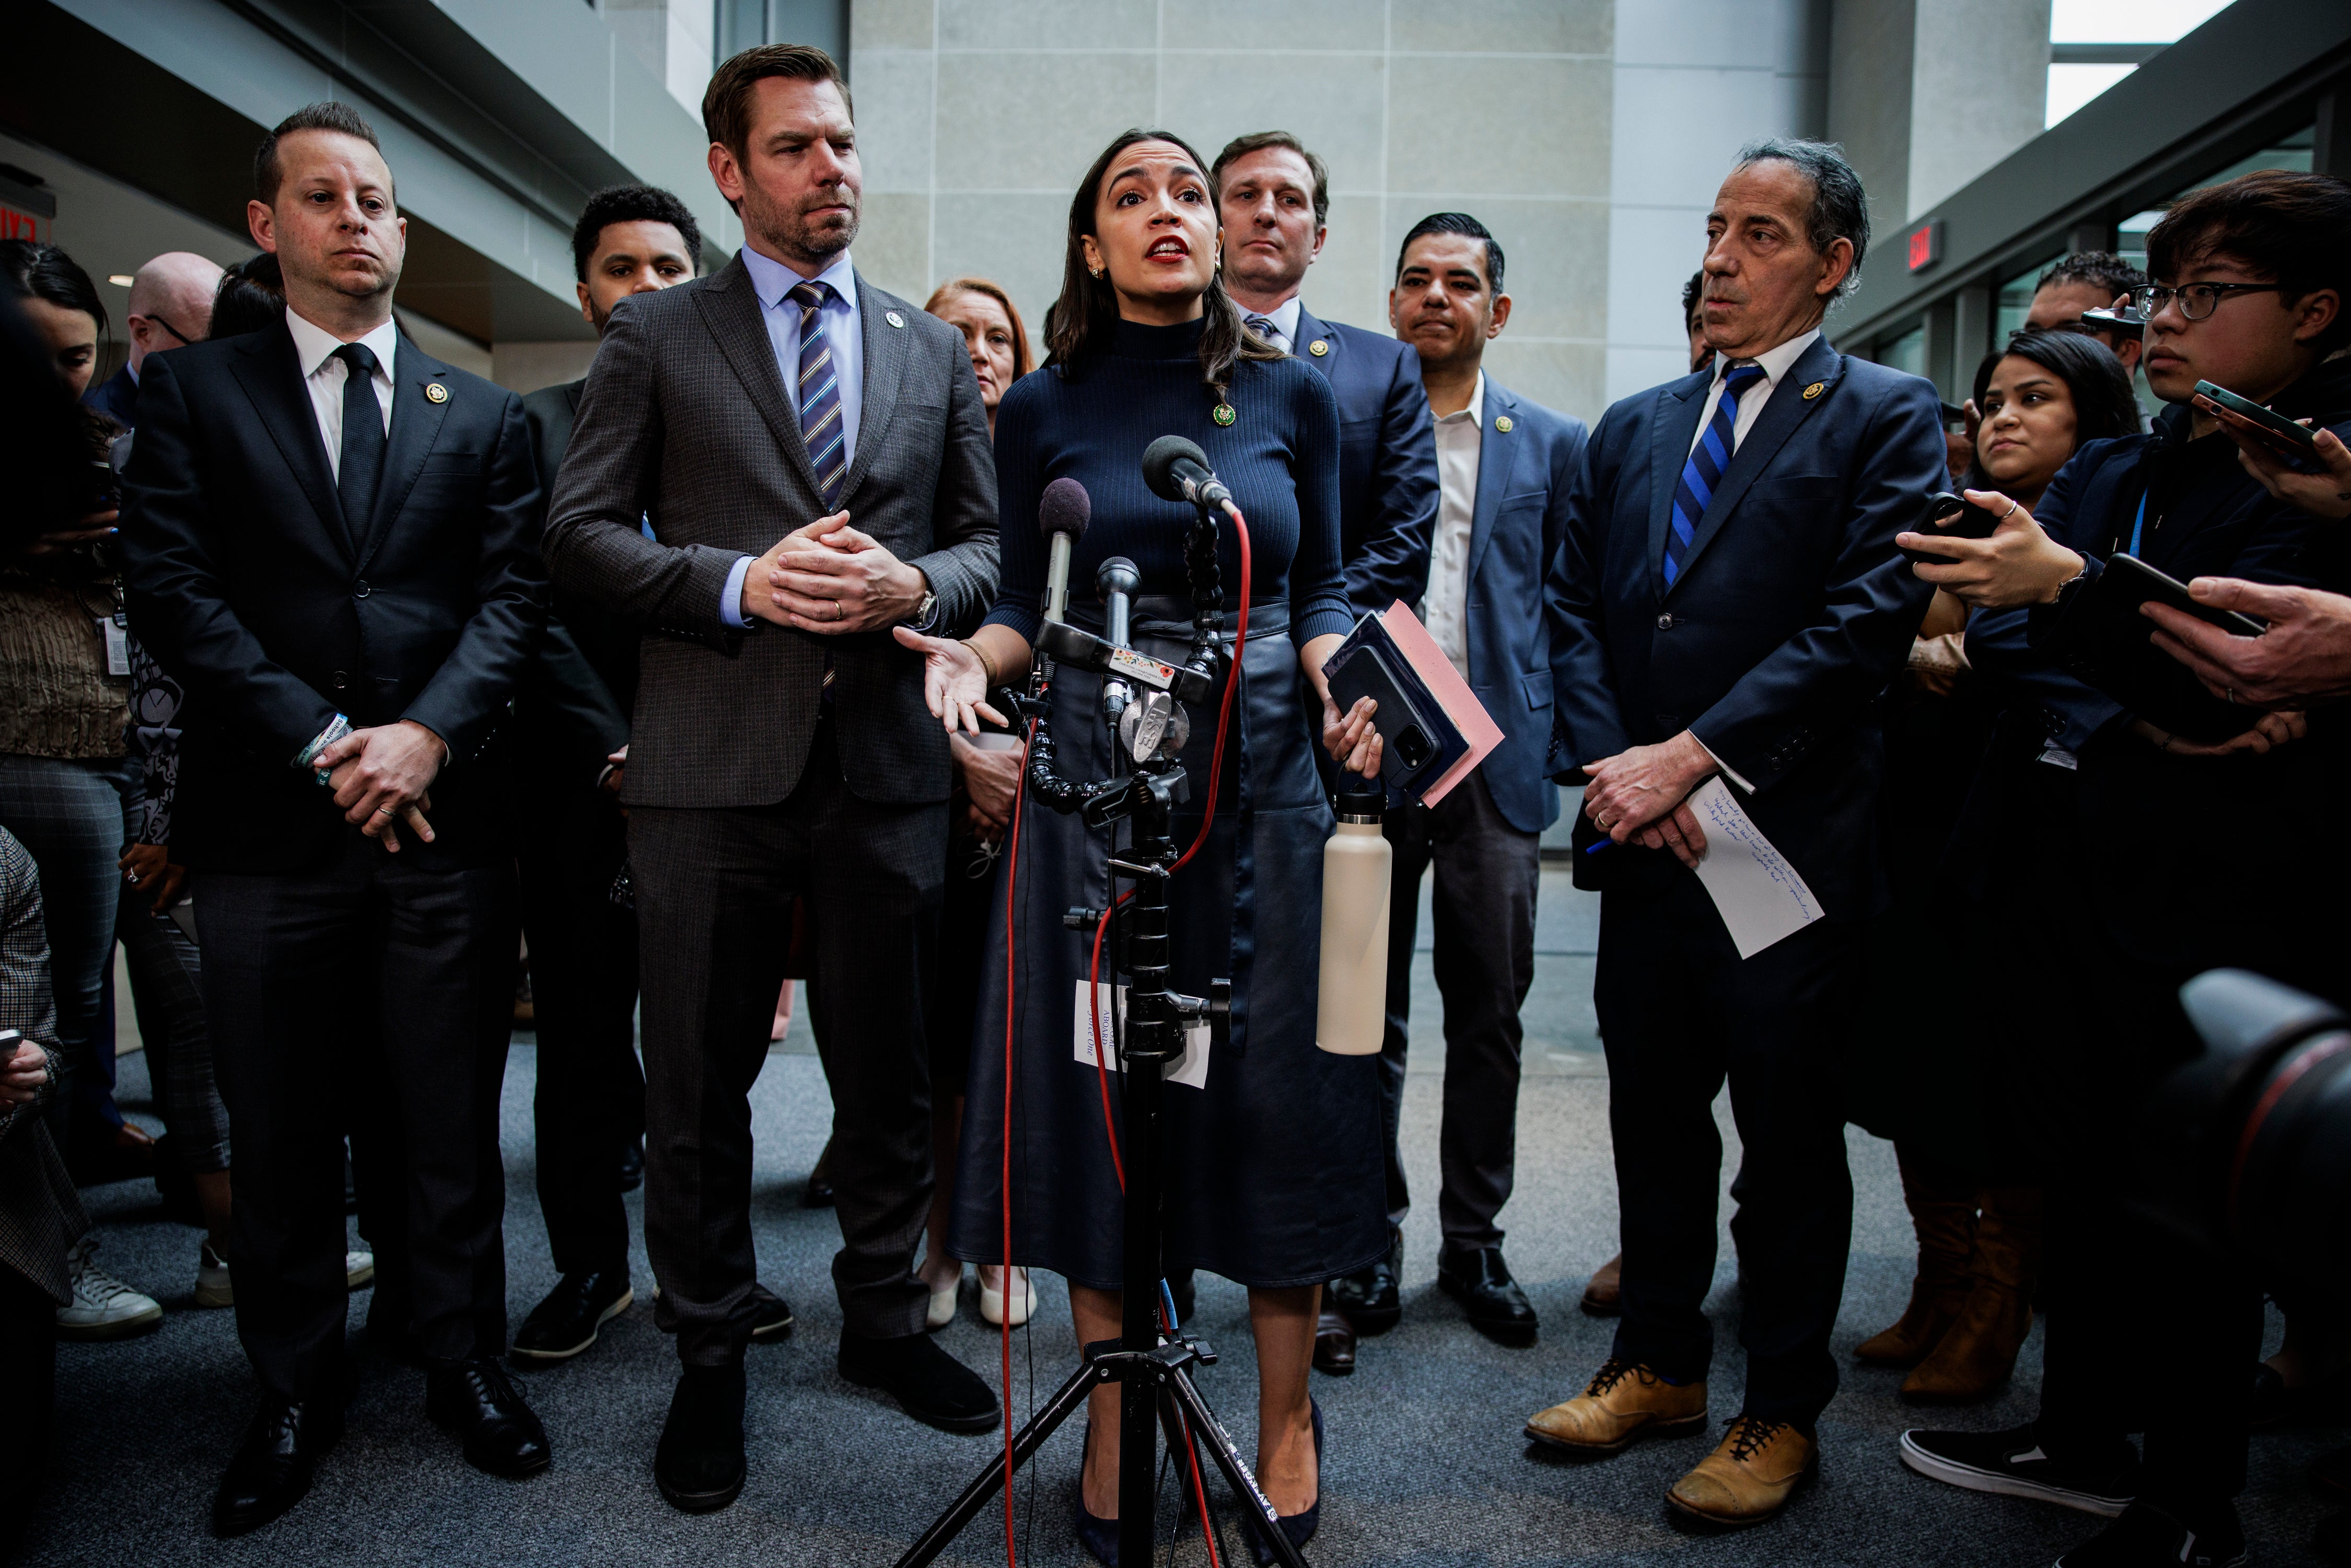 WASHINGTON, DC - FEBRUARY 28: Rep. Alexandria Ocasio-Cortez (D-NY) speaks during a press conference with other Democratic members of the House Committee on Oversight and Accountability, and House Judiciary Committee during a break in the closed-door deposition of Hunter Biden, son of U.S. President Joe Biden, in the O’Neill House Office Building on February 28, 2024 in Washington, DC. The meeting is part of the Republicans’ impeachment inquiry into President Joe Biden. (Photo by Samuel Corum/Getty Images)